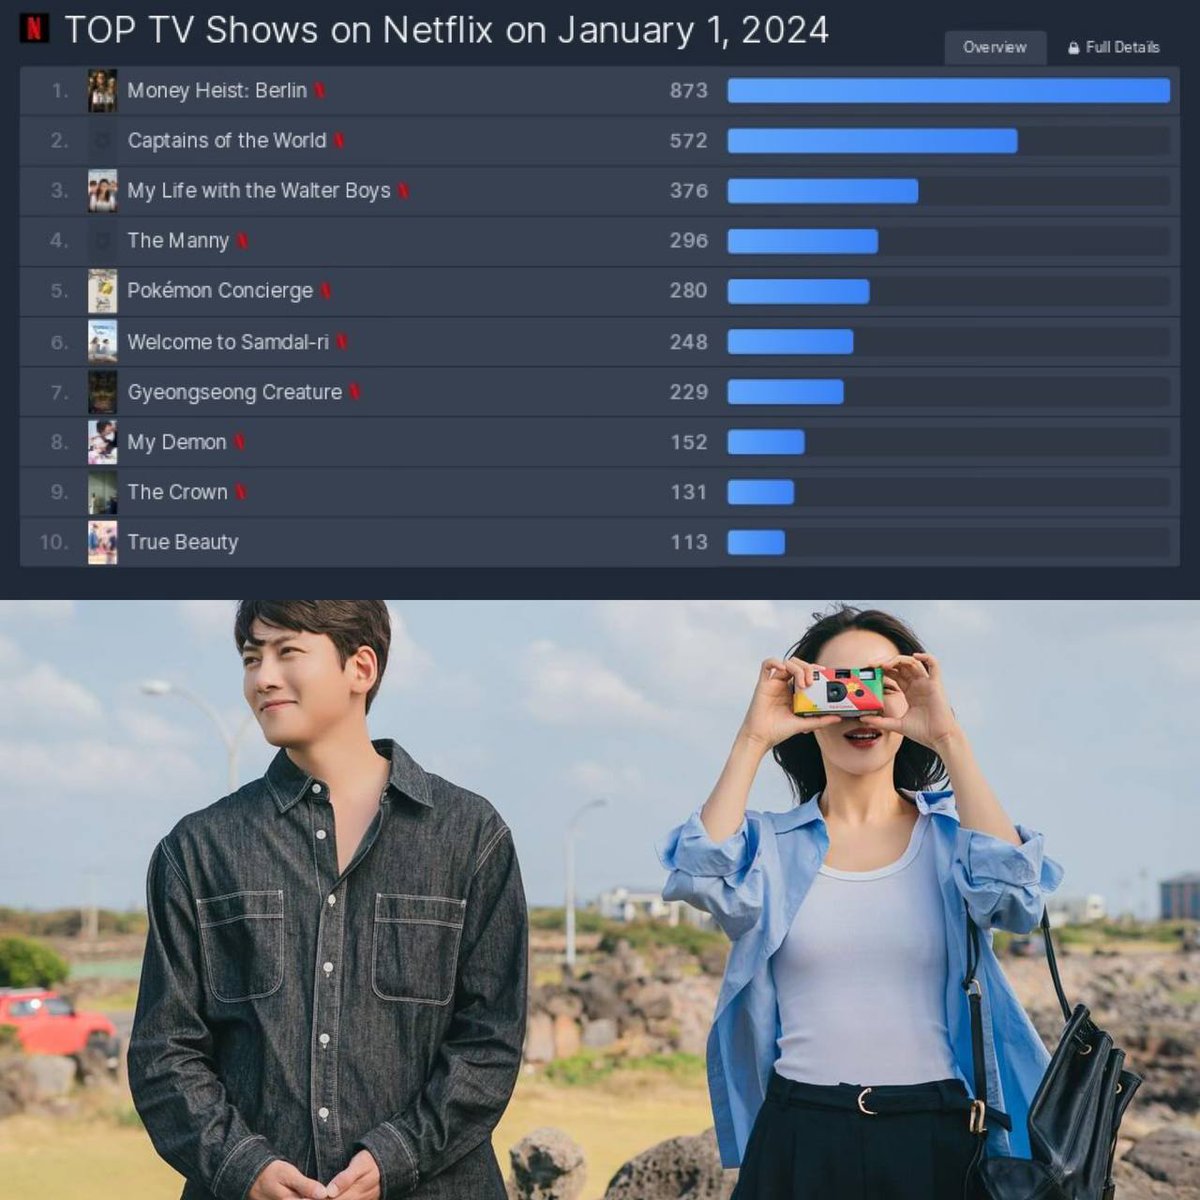 WELCOME TO SAMDALRI TEMBUS NETFLIX RANKING WORLDWIDE WITH: 

- no photoshoot couple
- less promotion 
- no more content
- no fanservice from the main couple

KEREN BANGET •kdm• 🔥